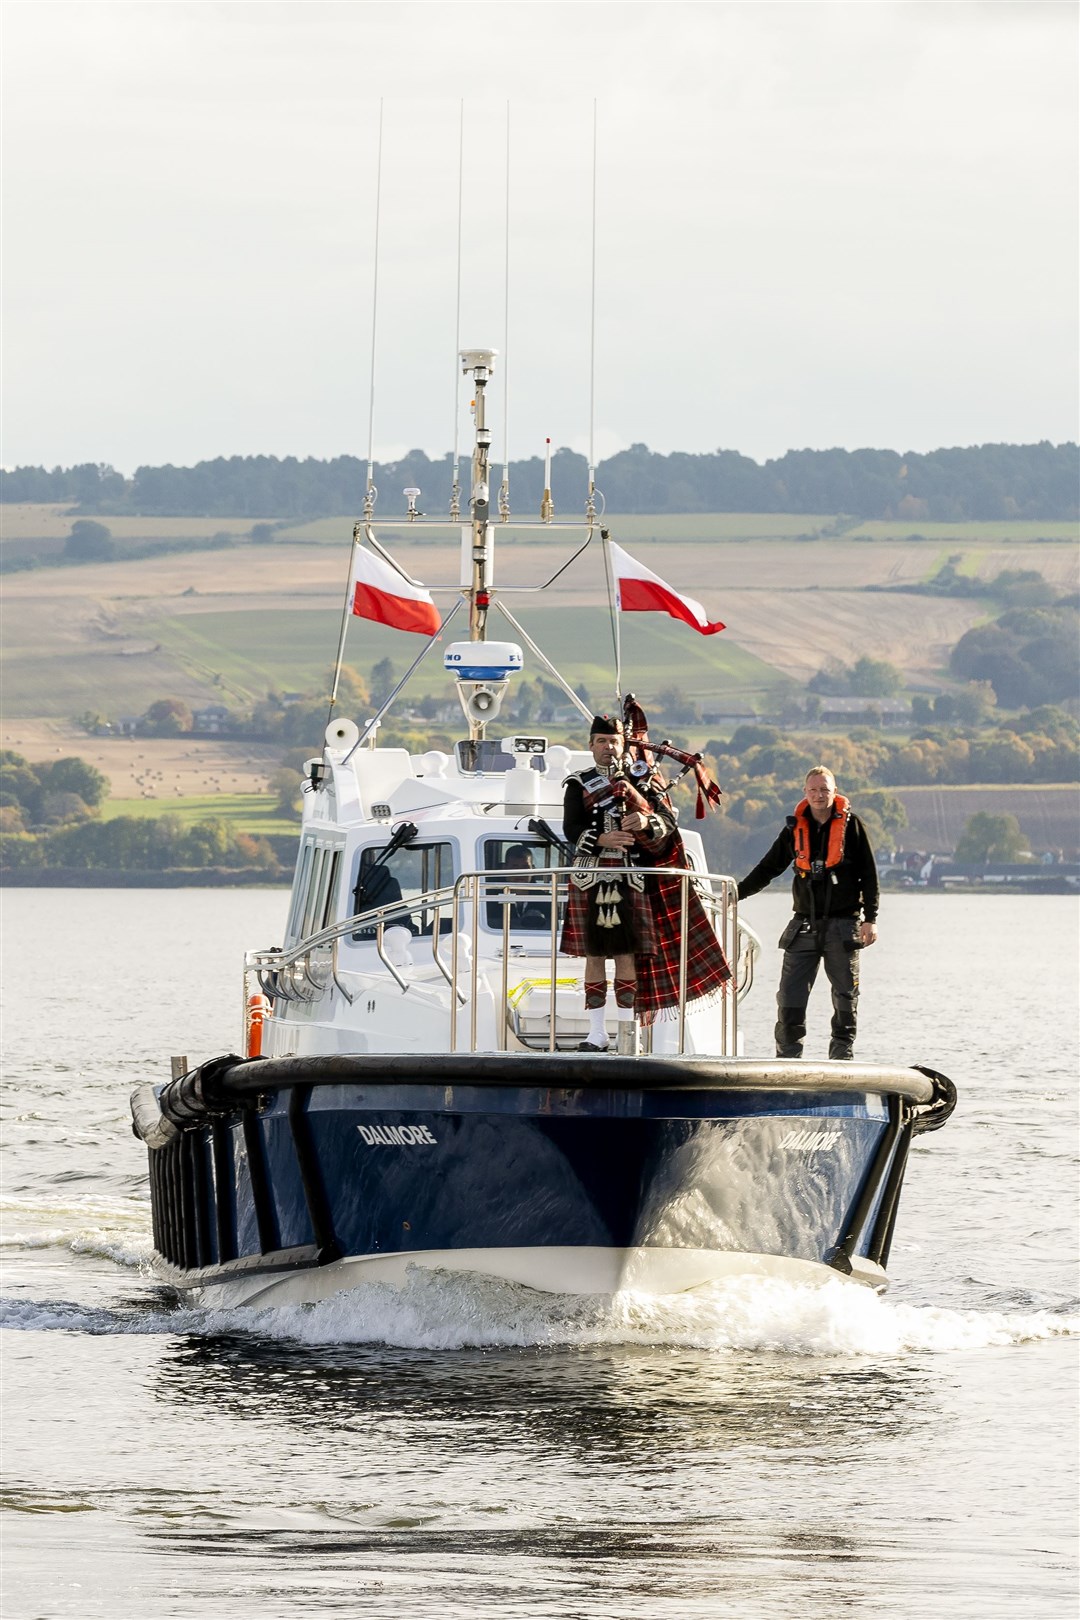 Dedication ceremony for the Dalmore, Port of Cromarty Firth, Friday 18, October, 2019. Image by: Malcolm McCurrach | © Malcolm McCurrach 2019 | New Wave Images UK | All rights Reserved. pictures@nwimages.co.uk | www.nwimages.co.uk | 07743 719366